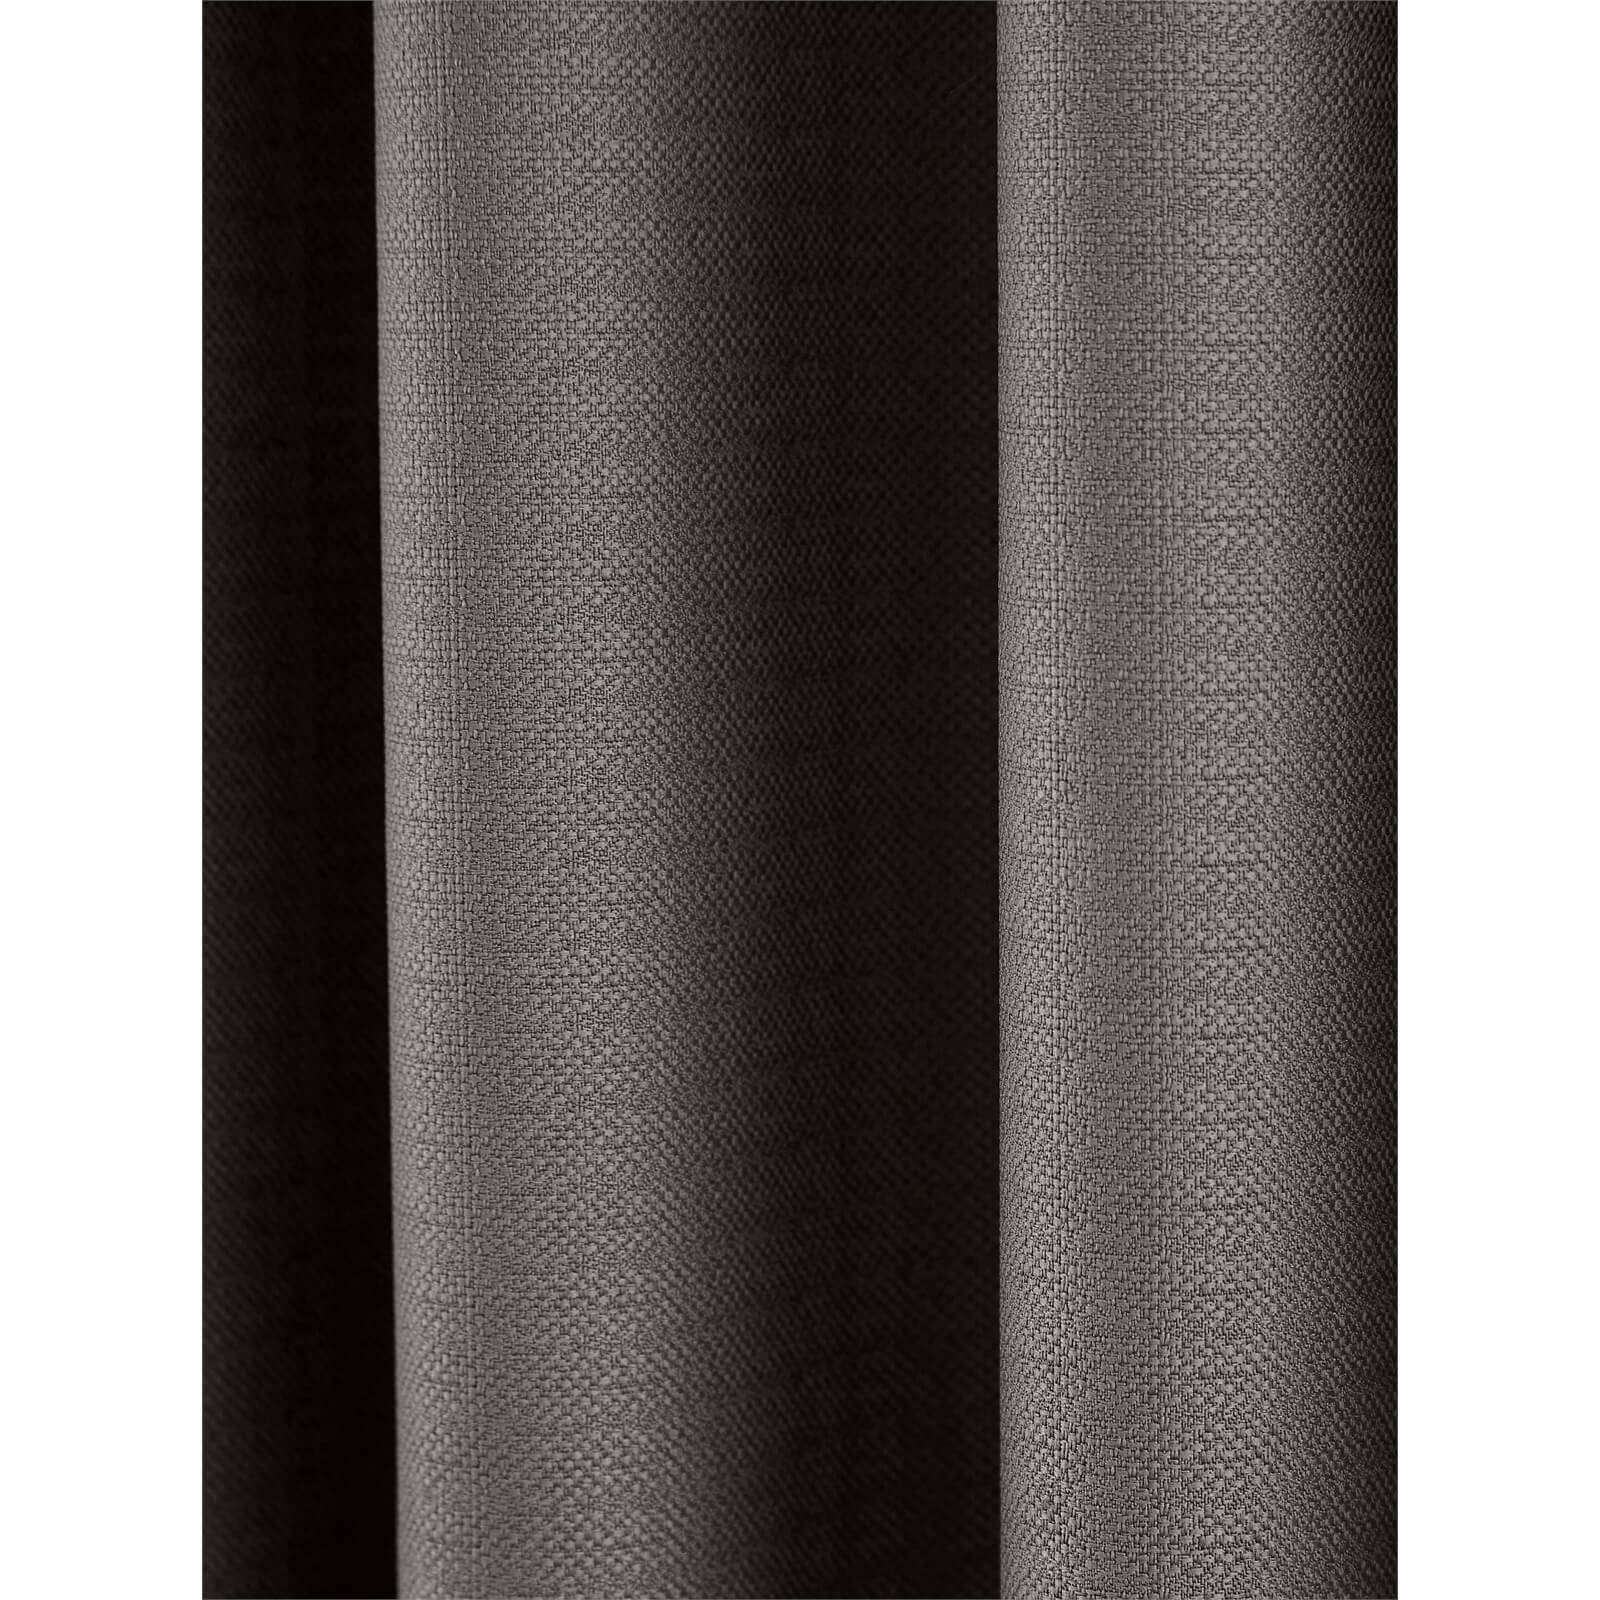 Helena Springfield Eden Lined Curtains 66 x 72 - Charcoal